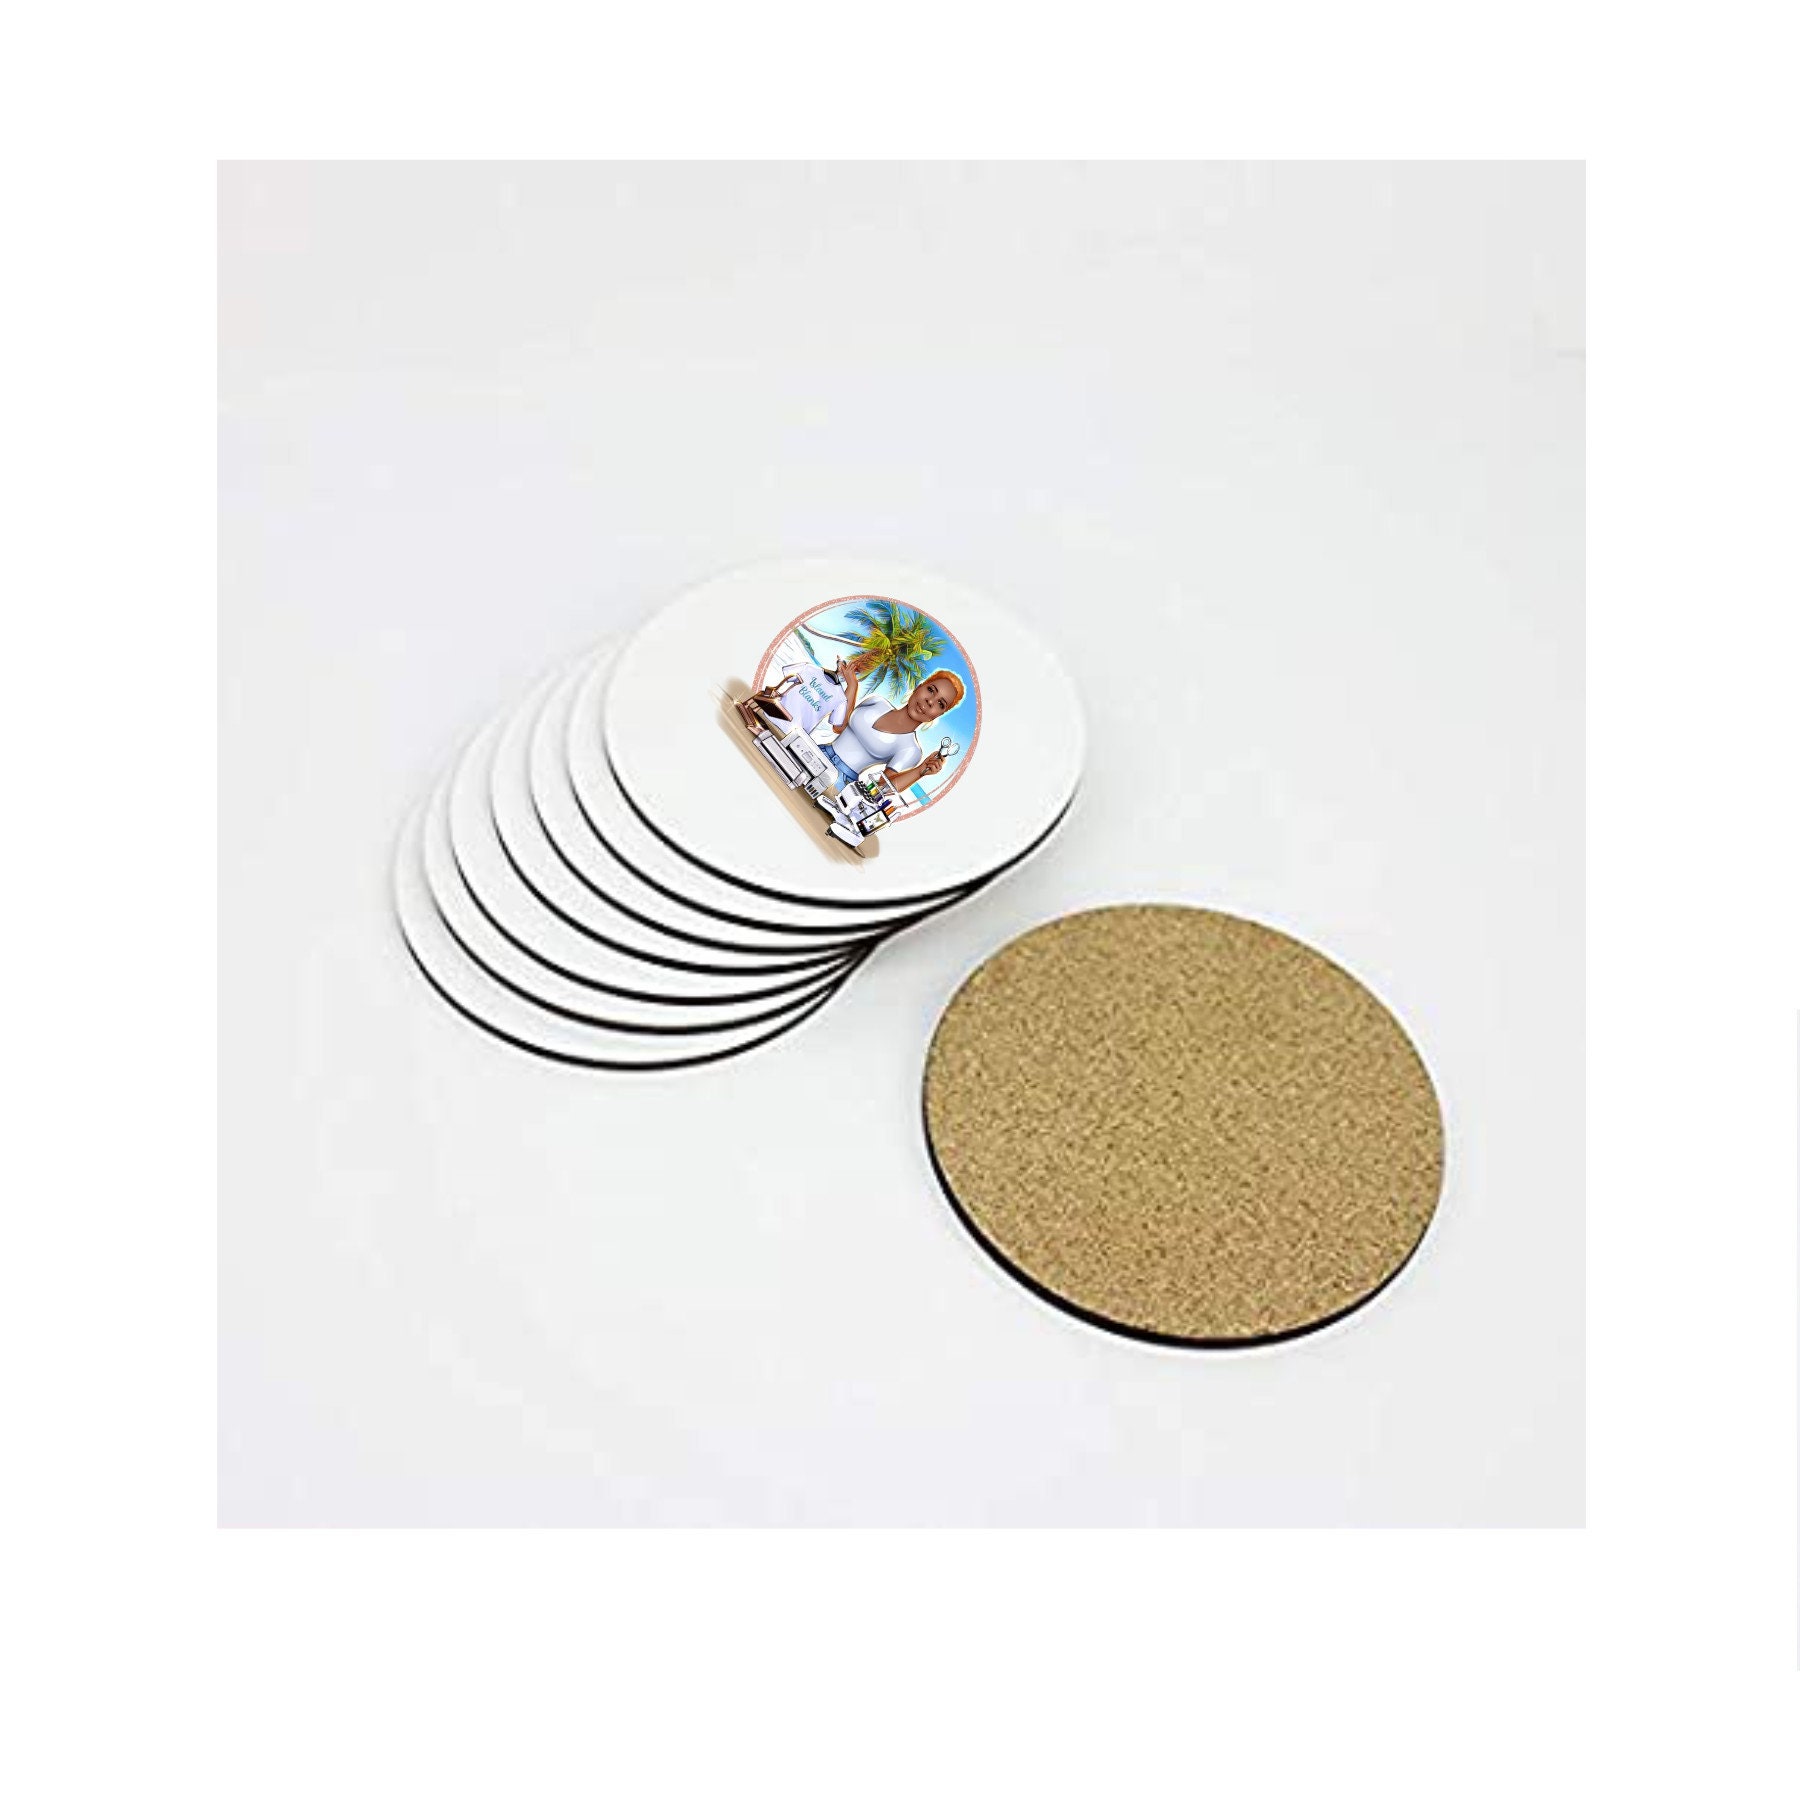 Jippedea Sublimation Blanks Drink Coasters,20 Pcs 3.5 inch MDF White Round Coasters for Crafts Painting Heat Transfer